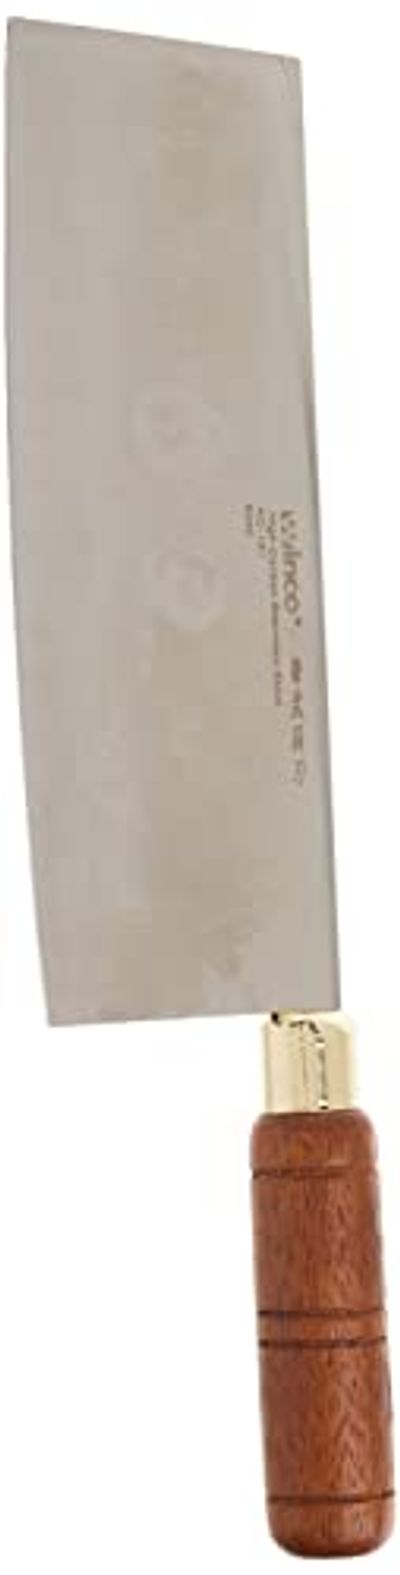 Winco Blade Chinese Cleaver with Wooden Handle, 3-1/2-Inch, Stainless Steel $14.36 (Reg $22.30)